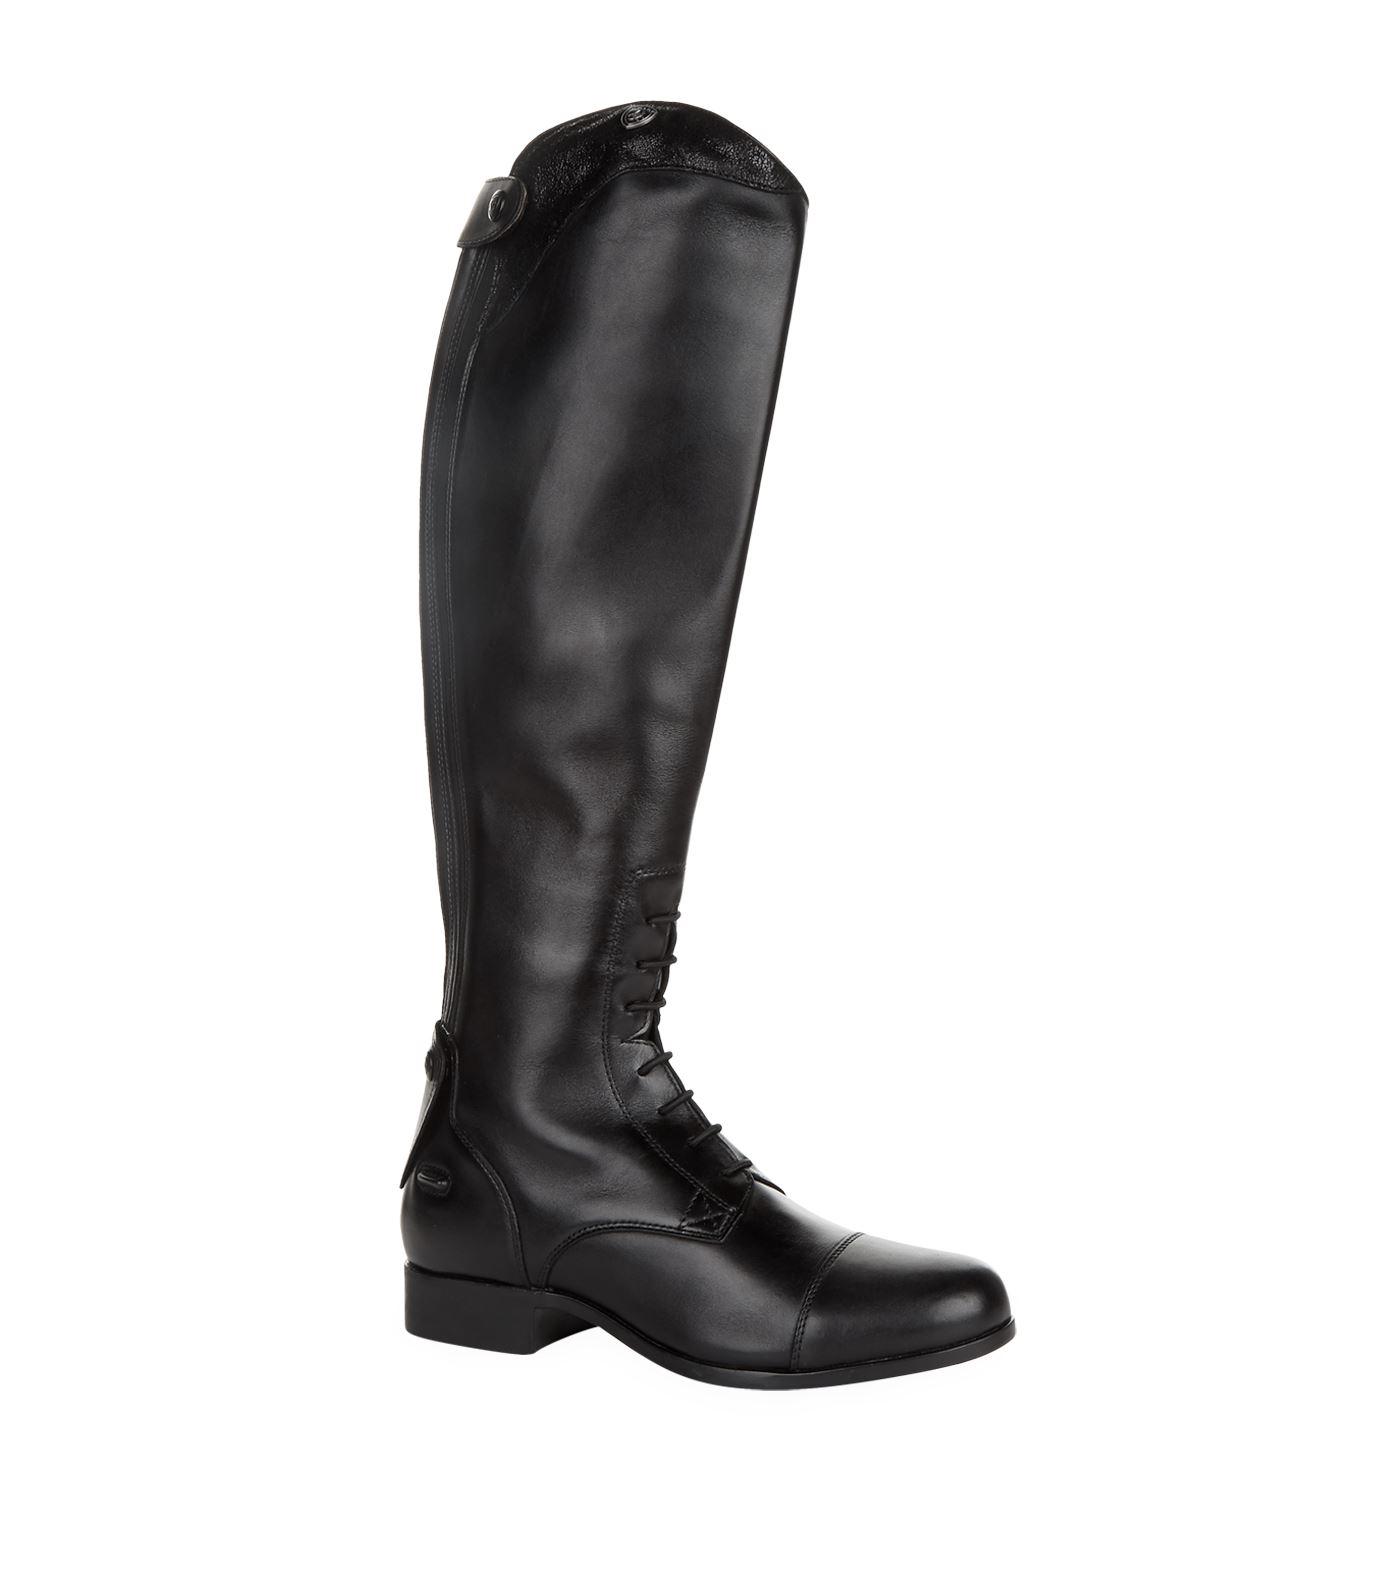 Ariat Leather Heritage Ii Ellipse Riding Boots in Black - Lyst